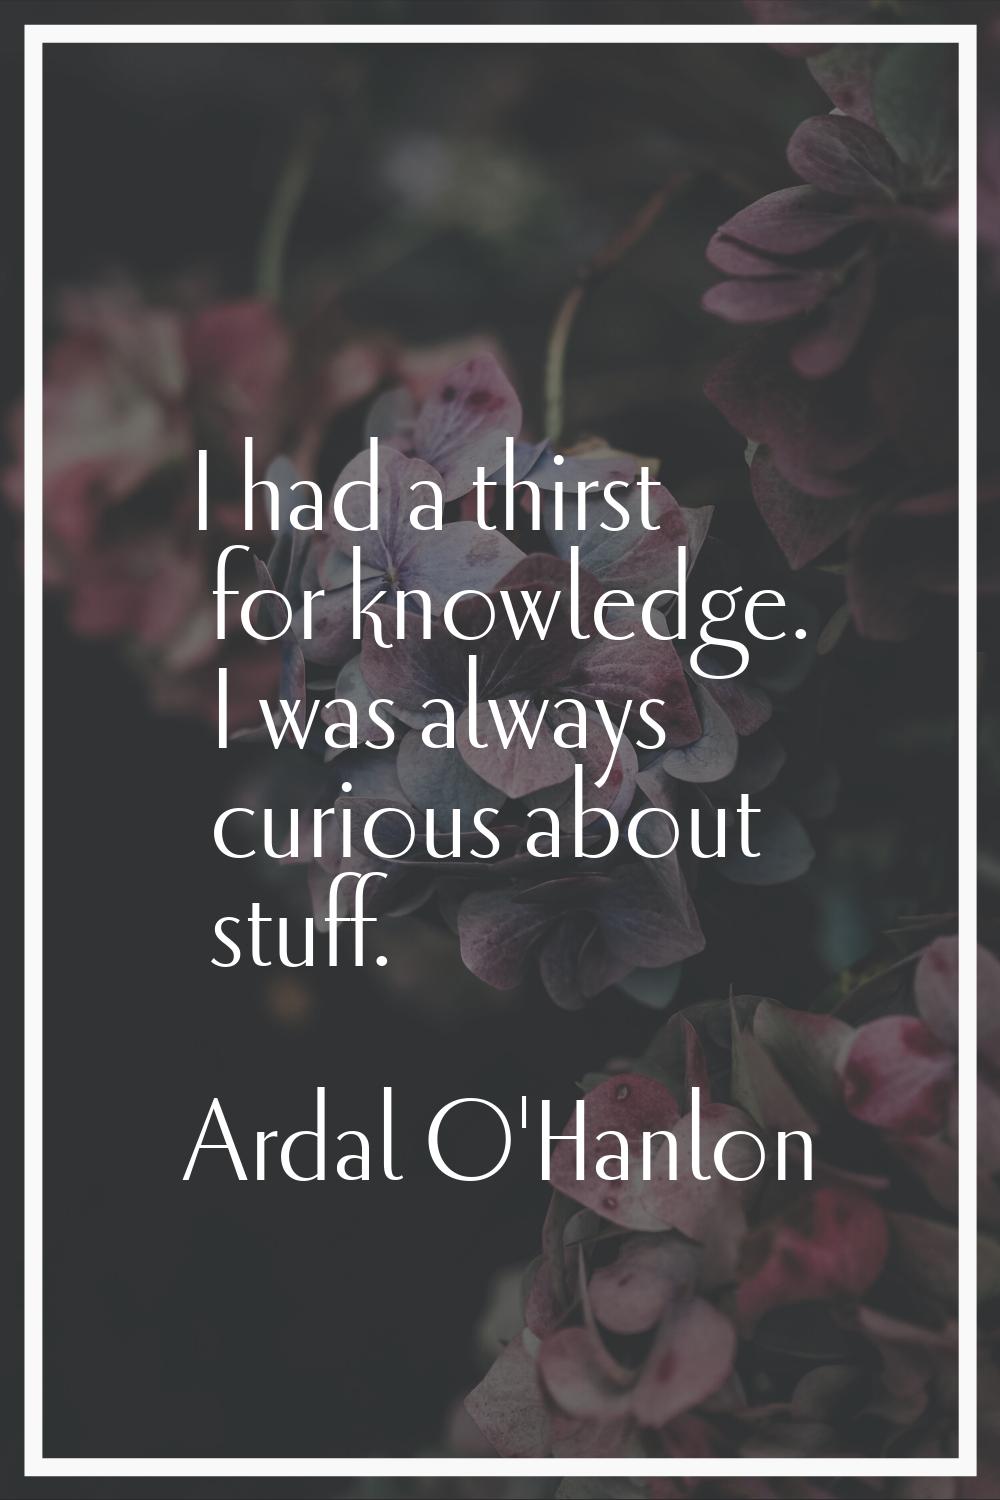 I had a thirst for knowledge. I was always curious about stuff.